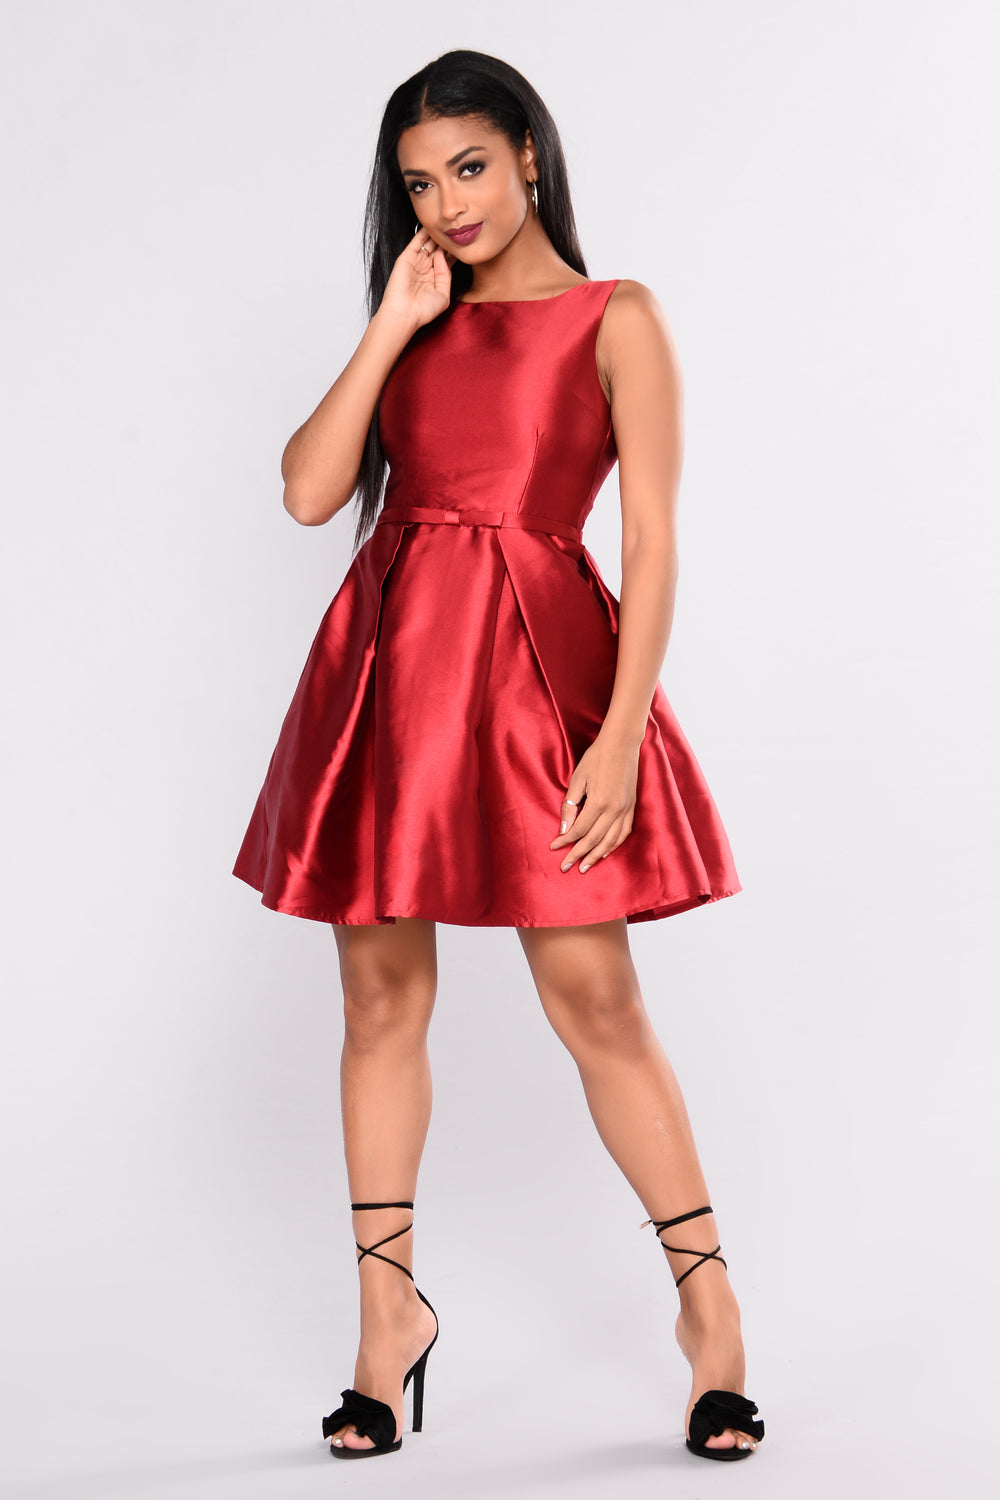 A Satin Holiday Dress - Red